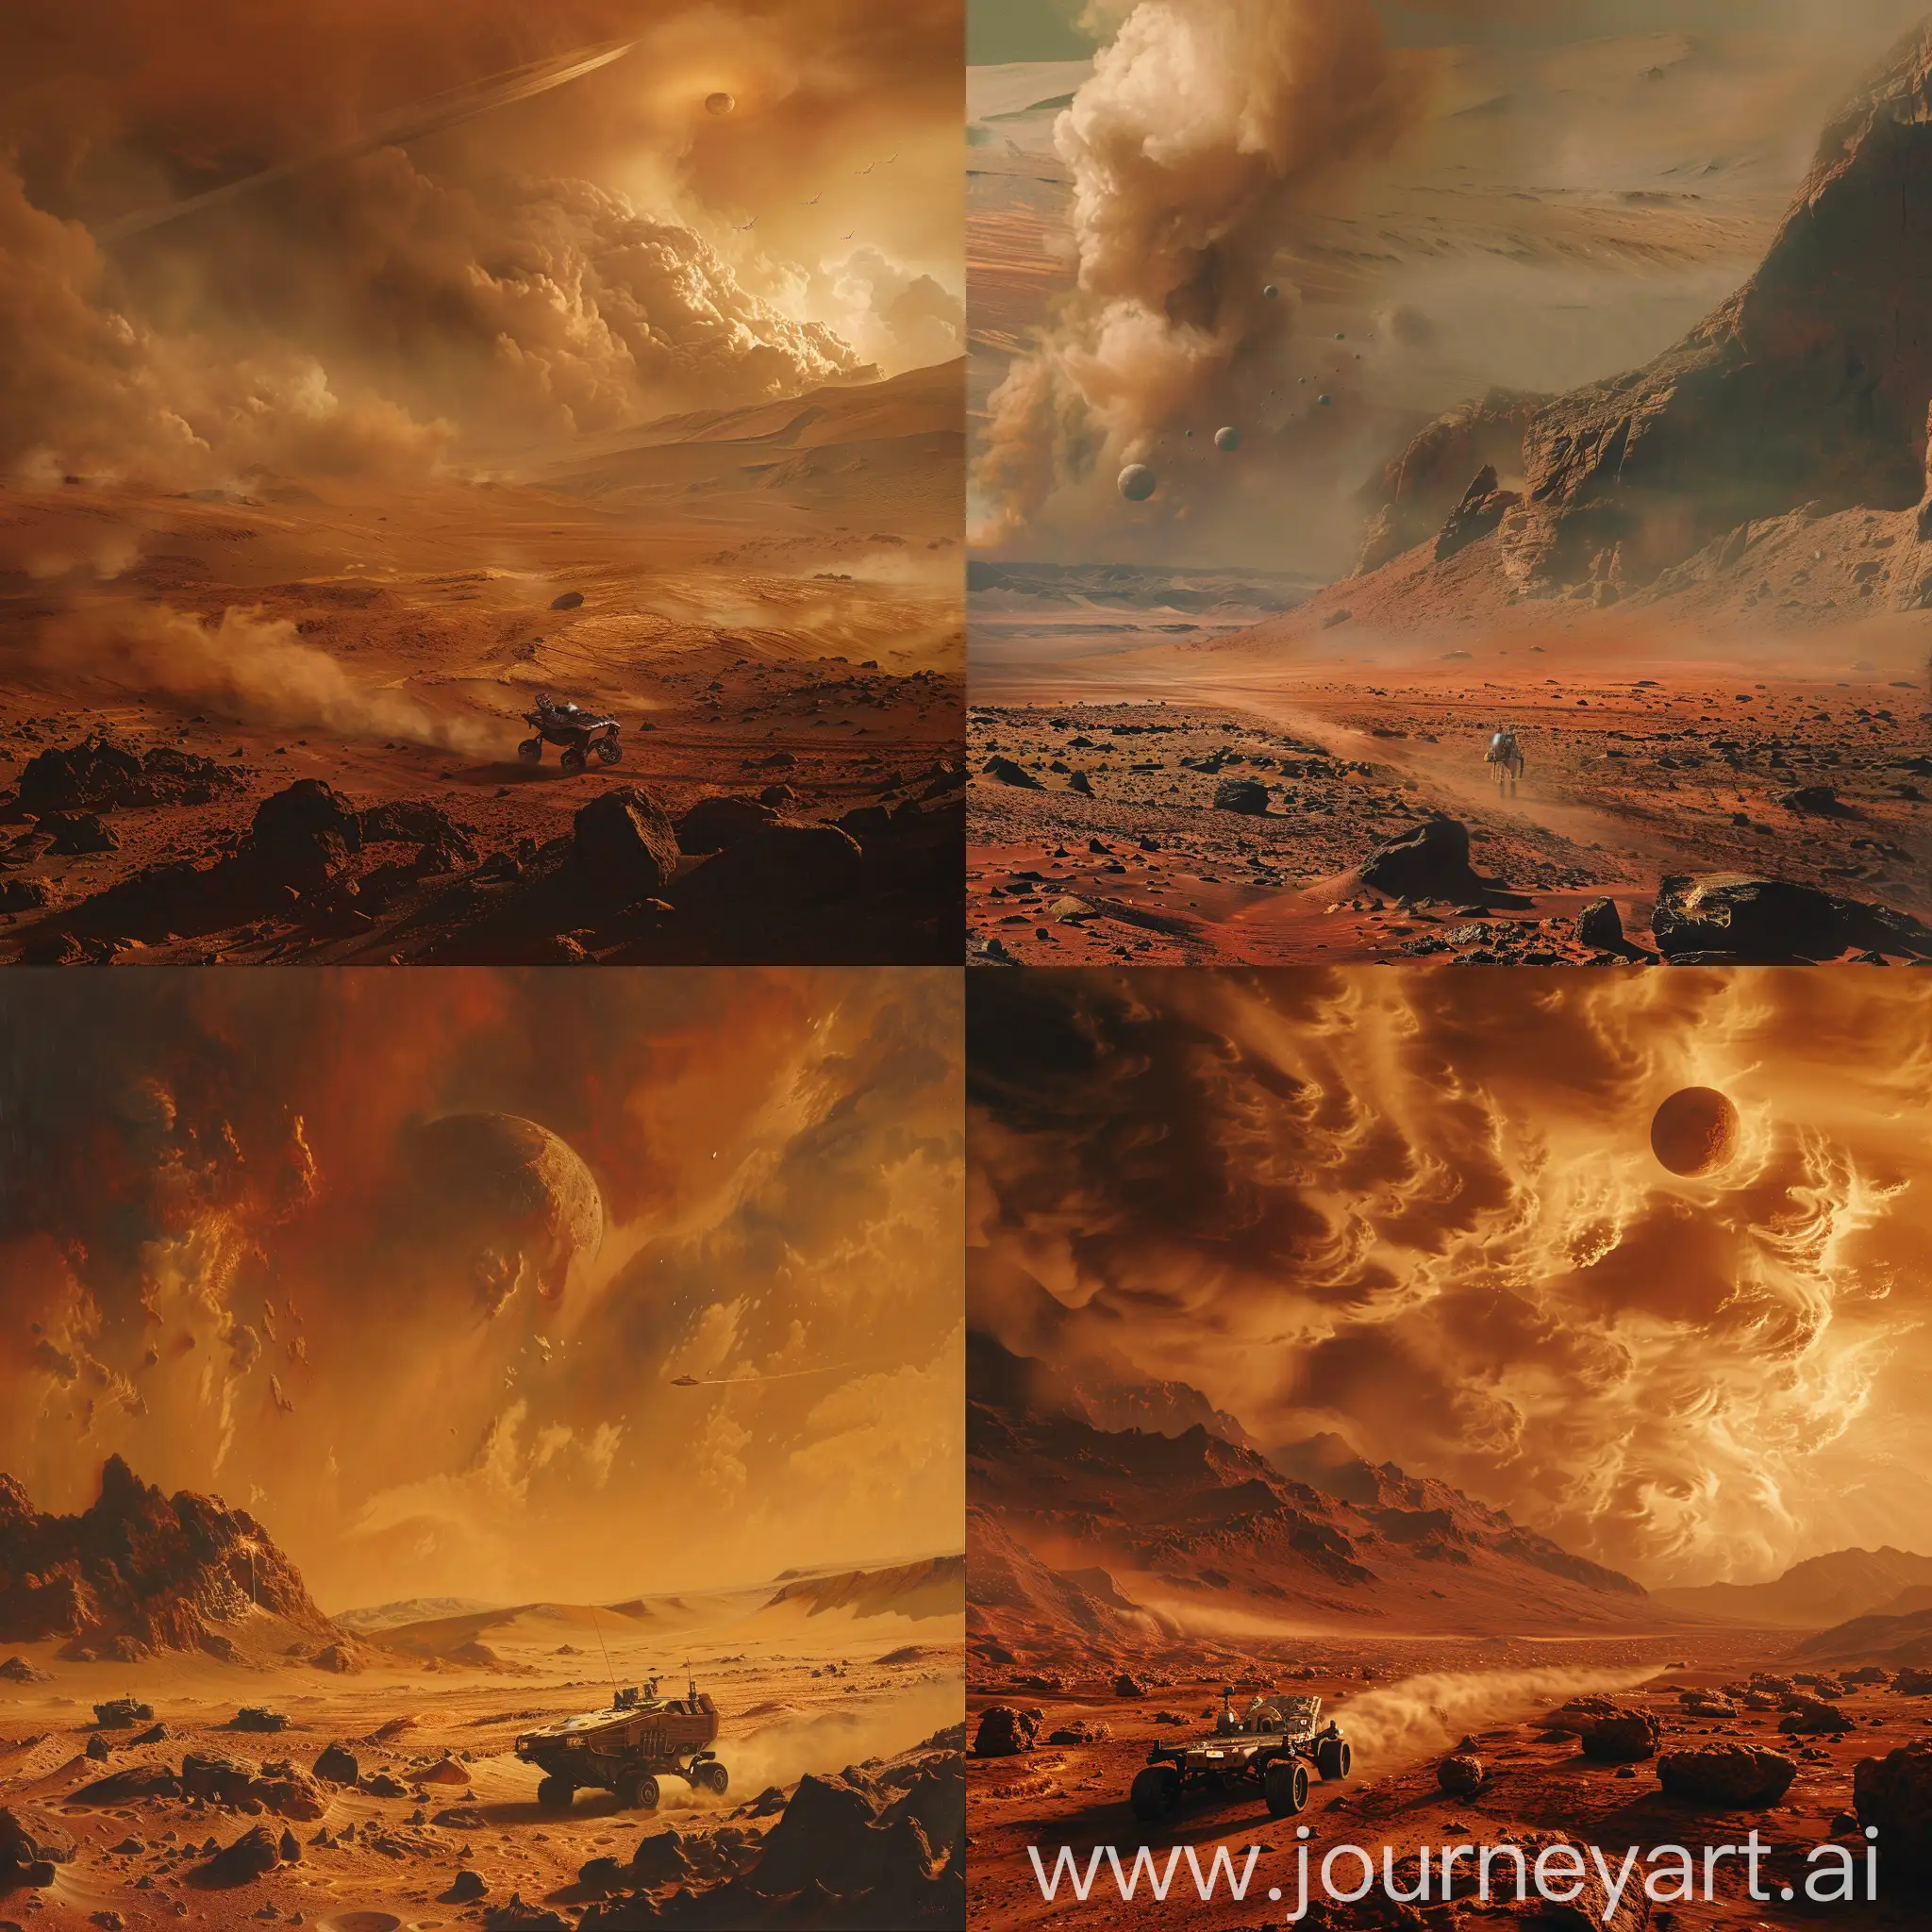 Cinematic-Mars-Landscape-with-Rover-and-Dust-Storms